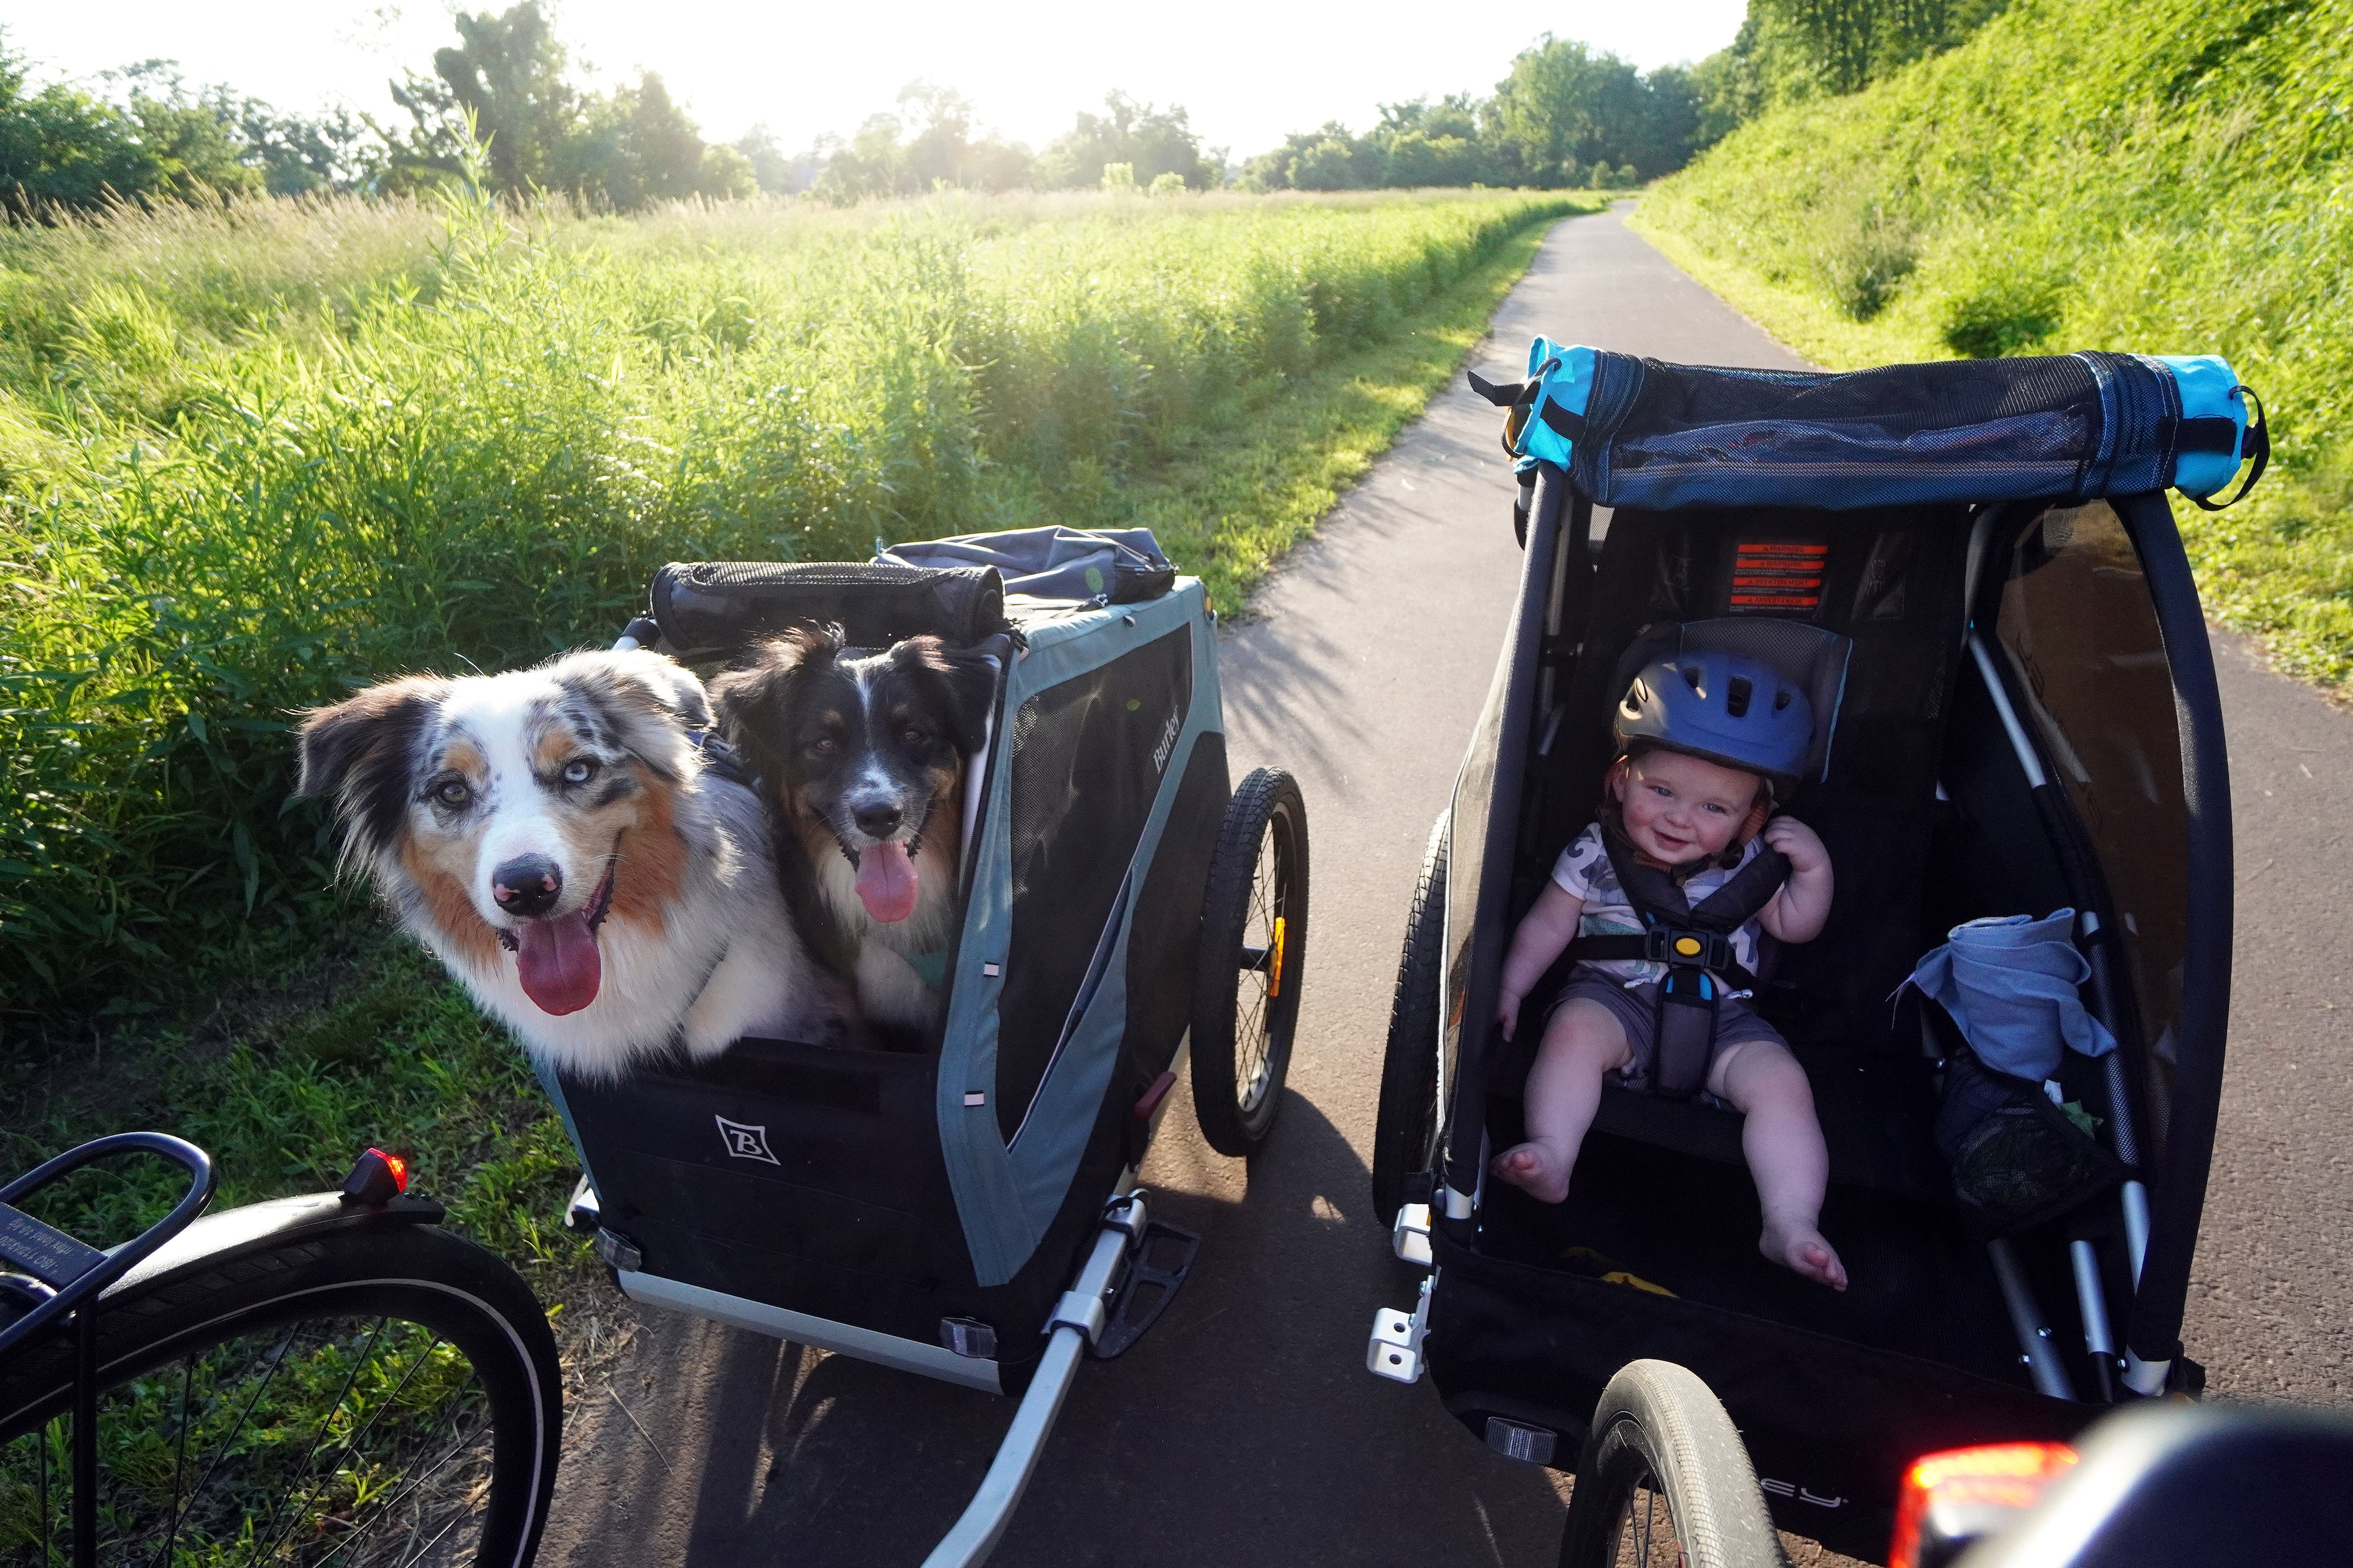 A baby is in one bike trailer and two dogs are in another bike trailer. 